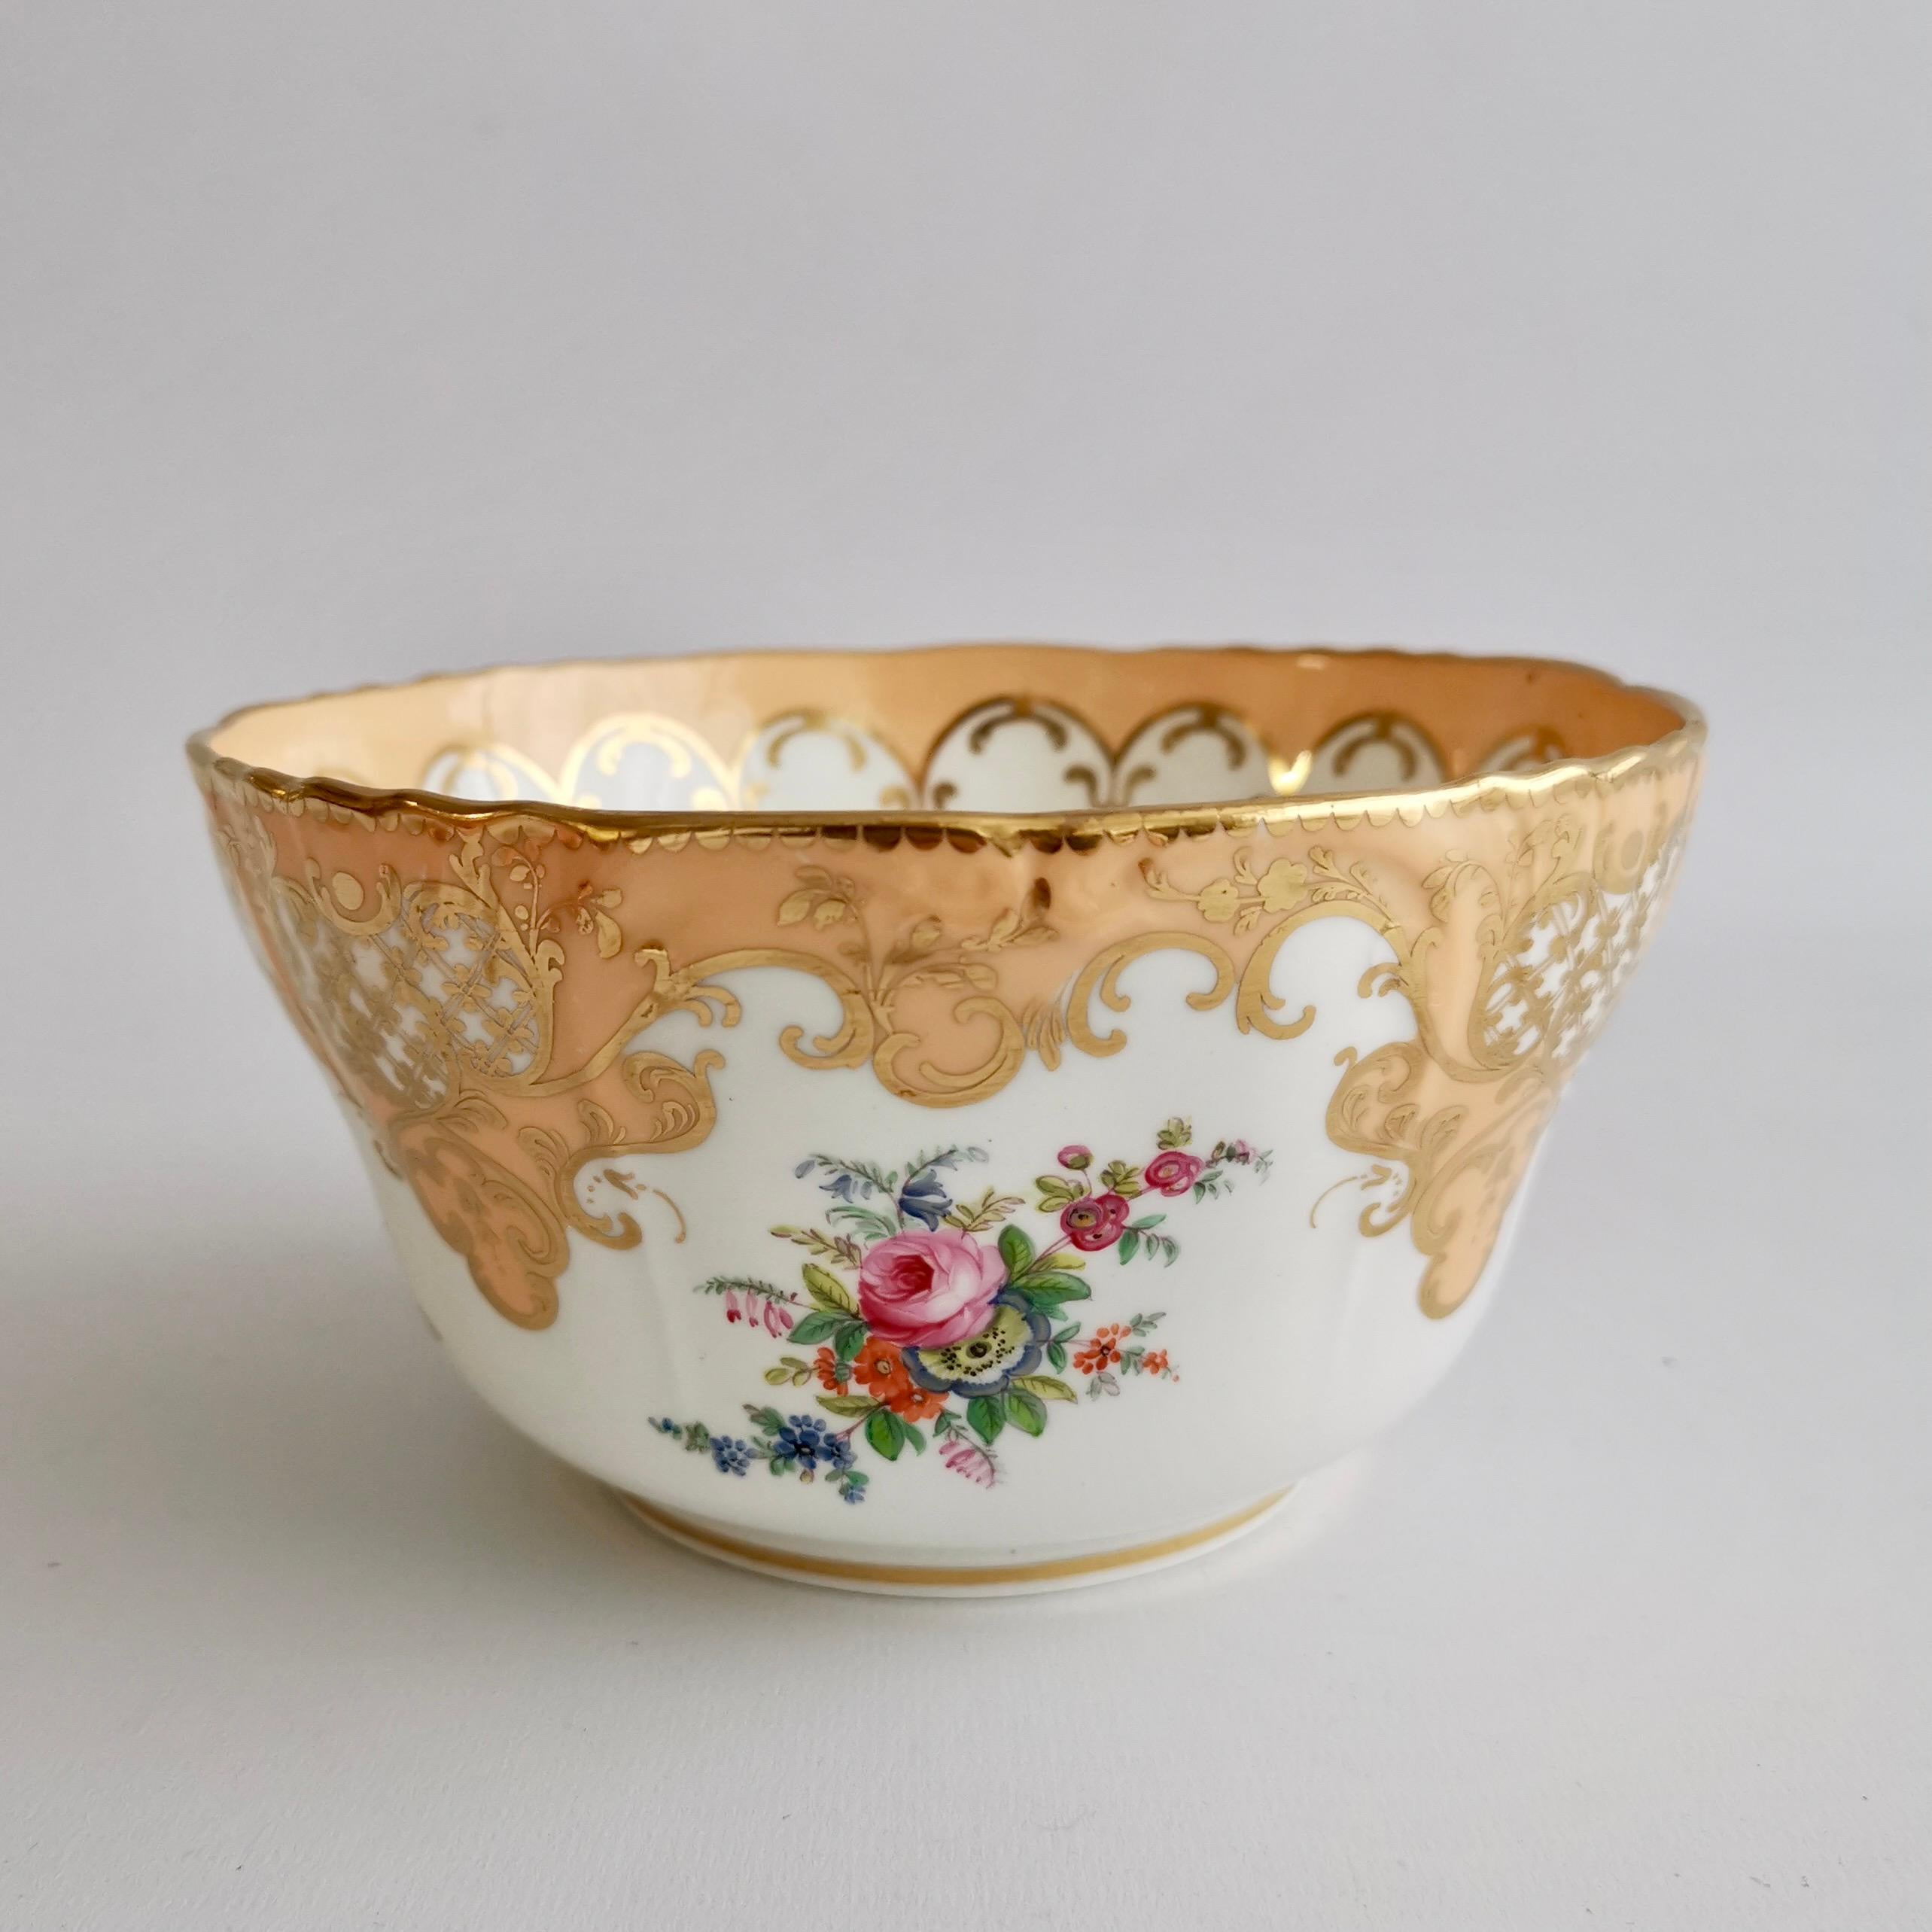 This is a beautiful slop bowl made around 1845 by Minton. It is decorated with a beautiful apricot orange ground and rich gilding, and four finely printed and then hand-colored flower arrangements. The bowl is shaped in a beautiful diapered